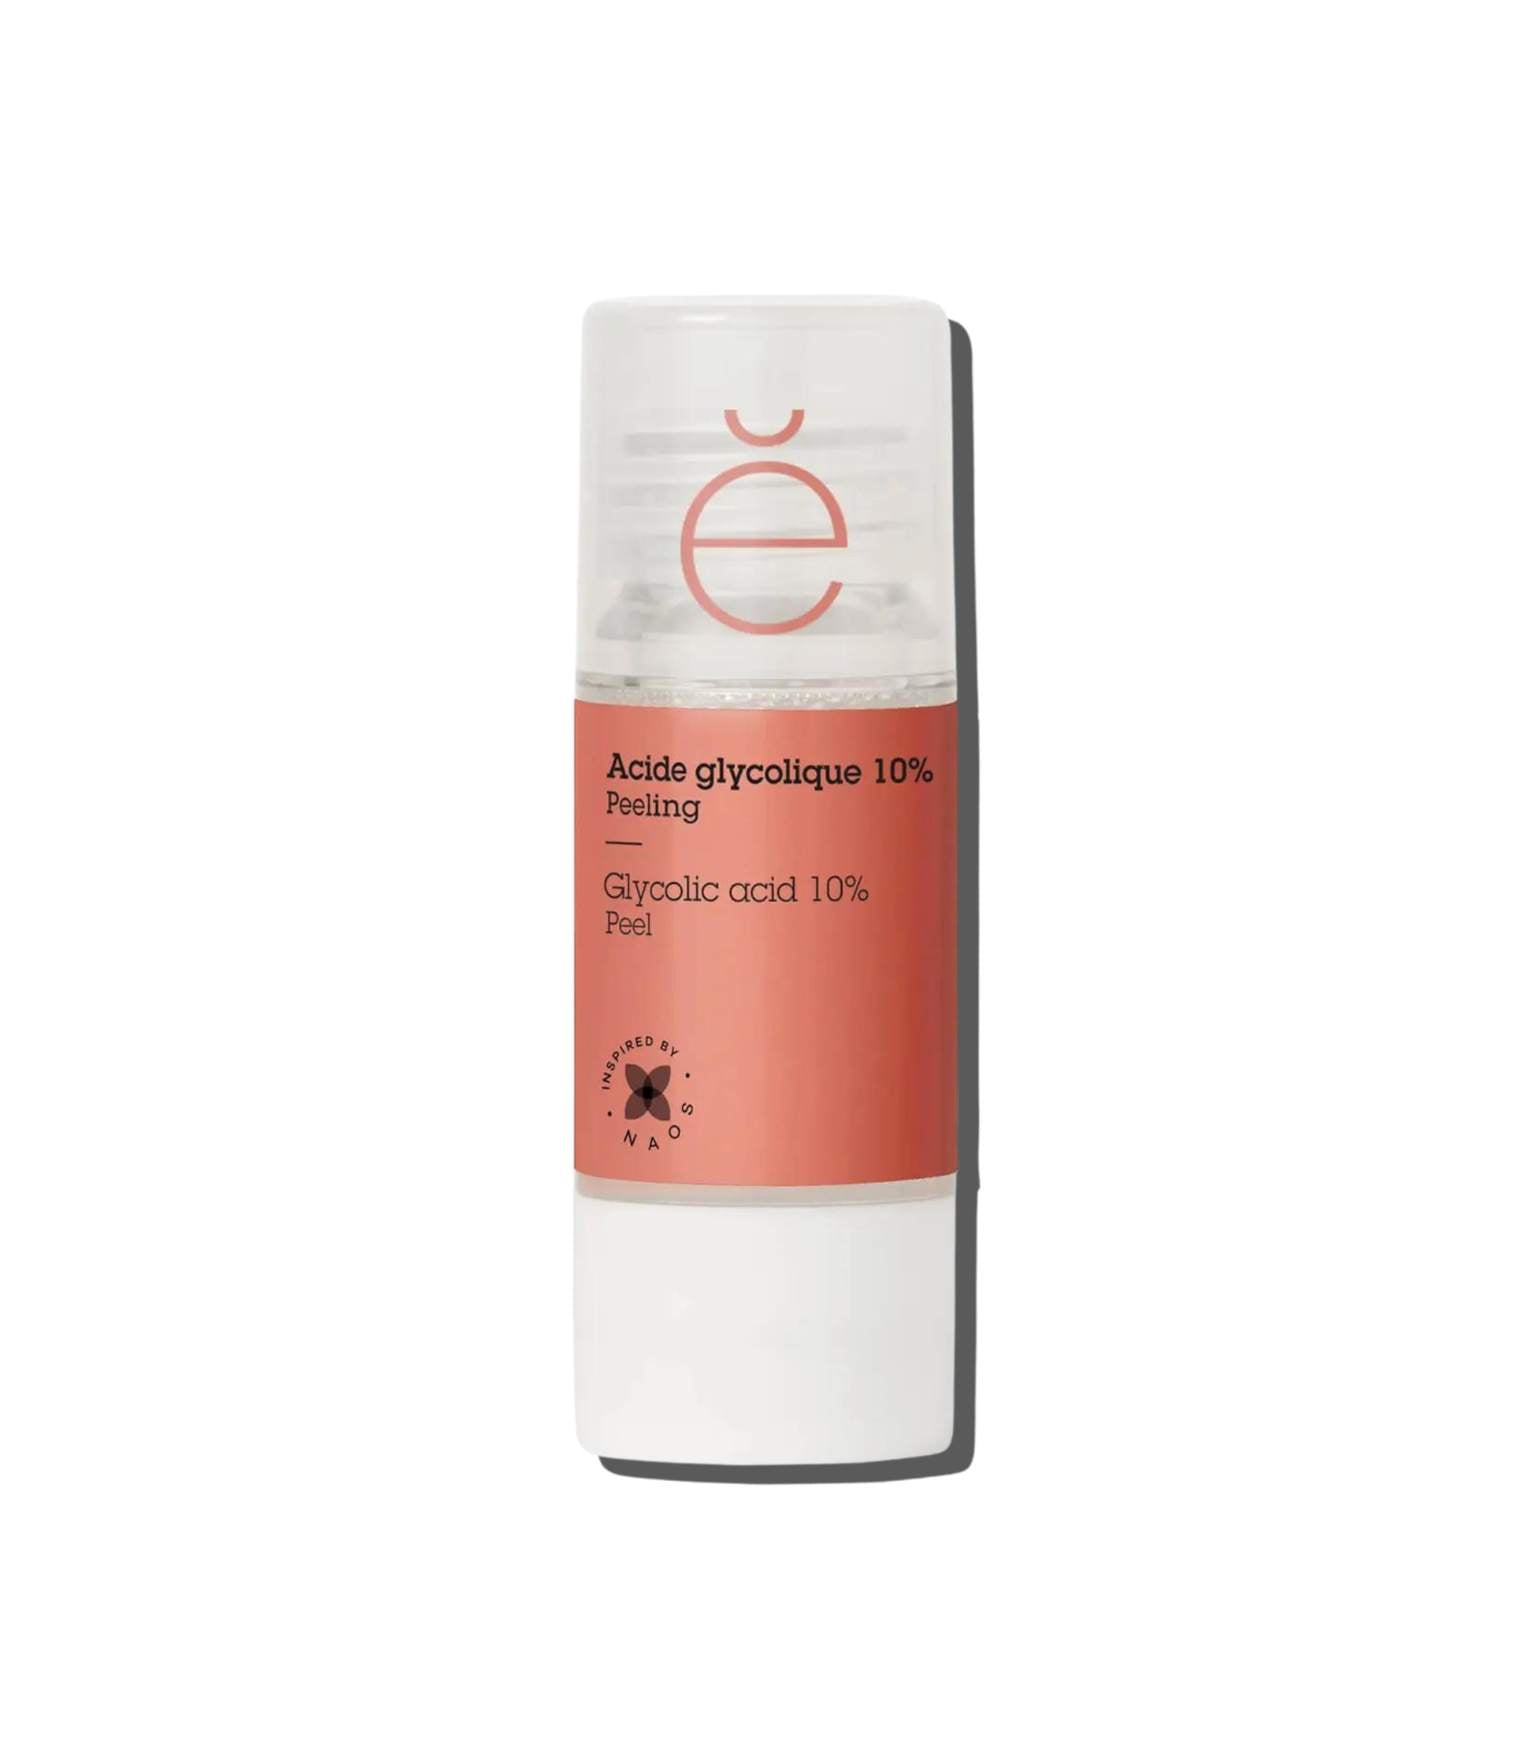 Glycolic Acid 10% 15ml when you spend $69 on Etat Pur - French Beauty Co.